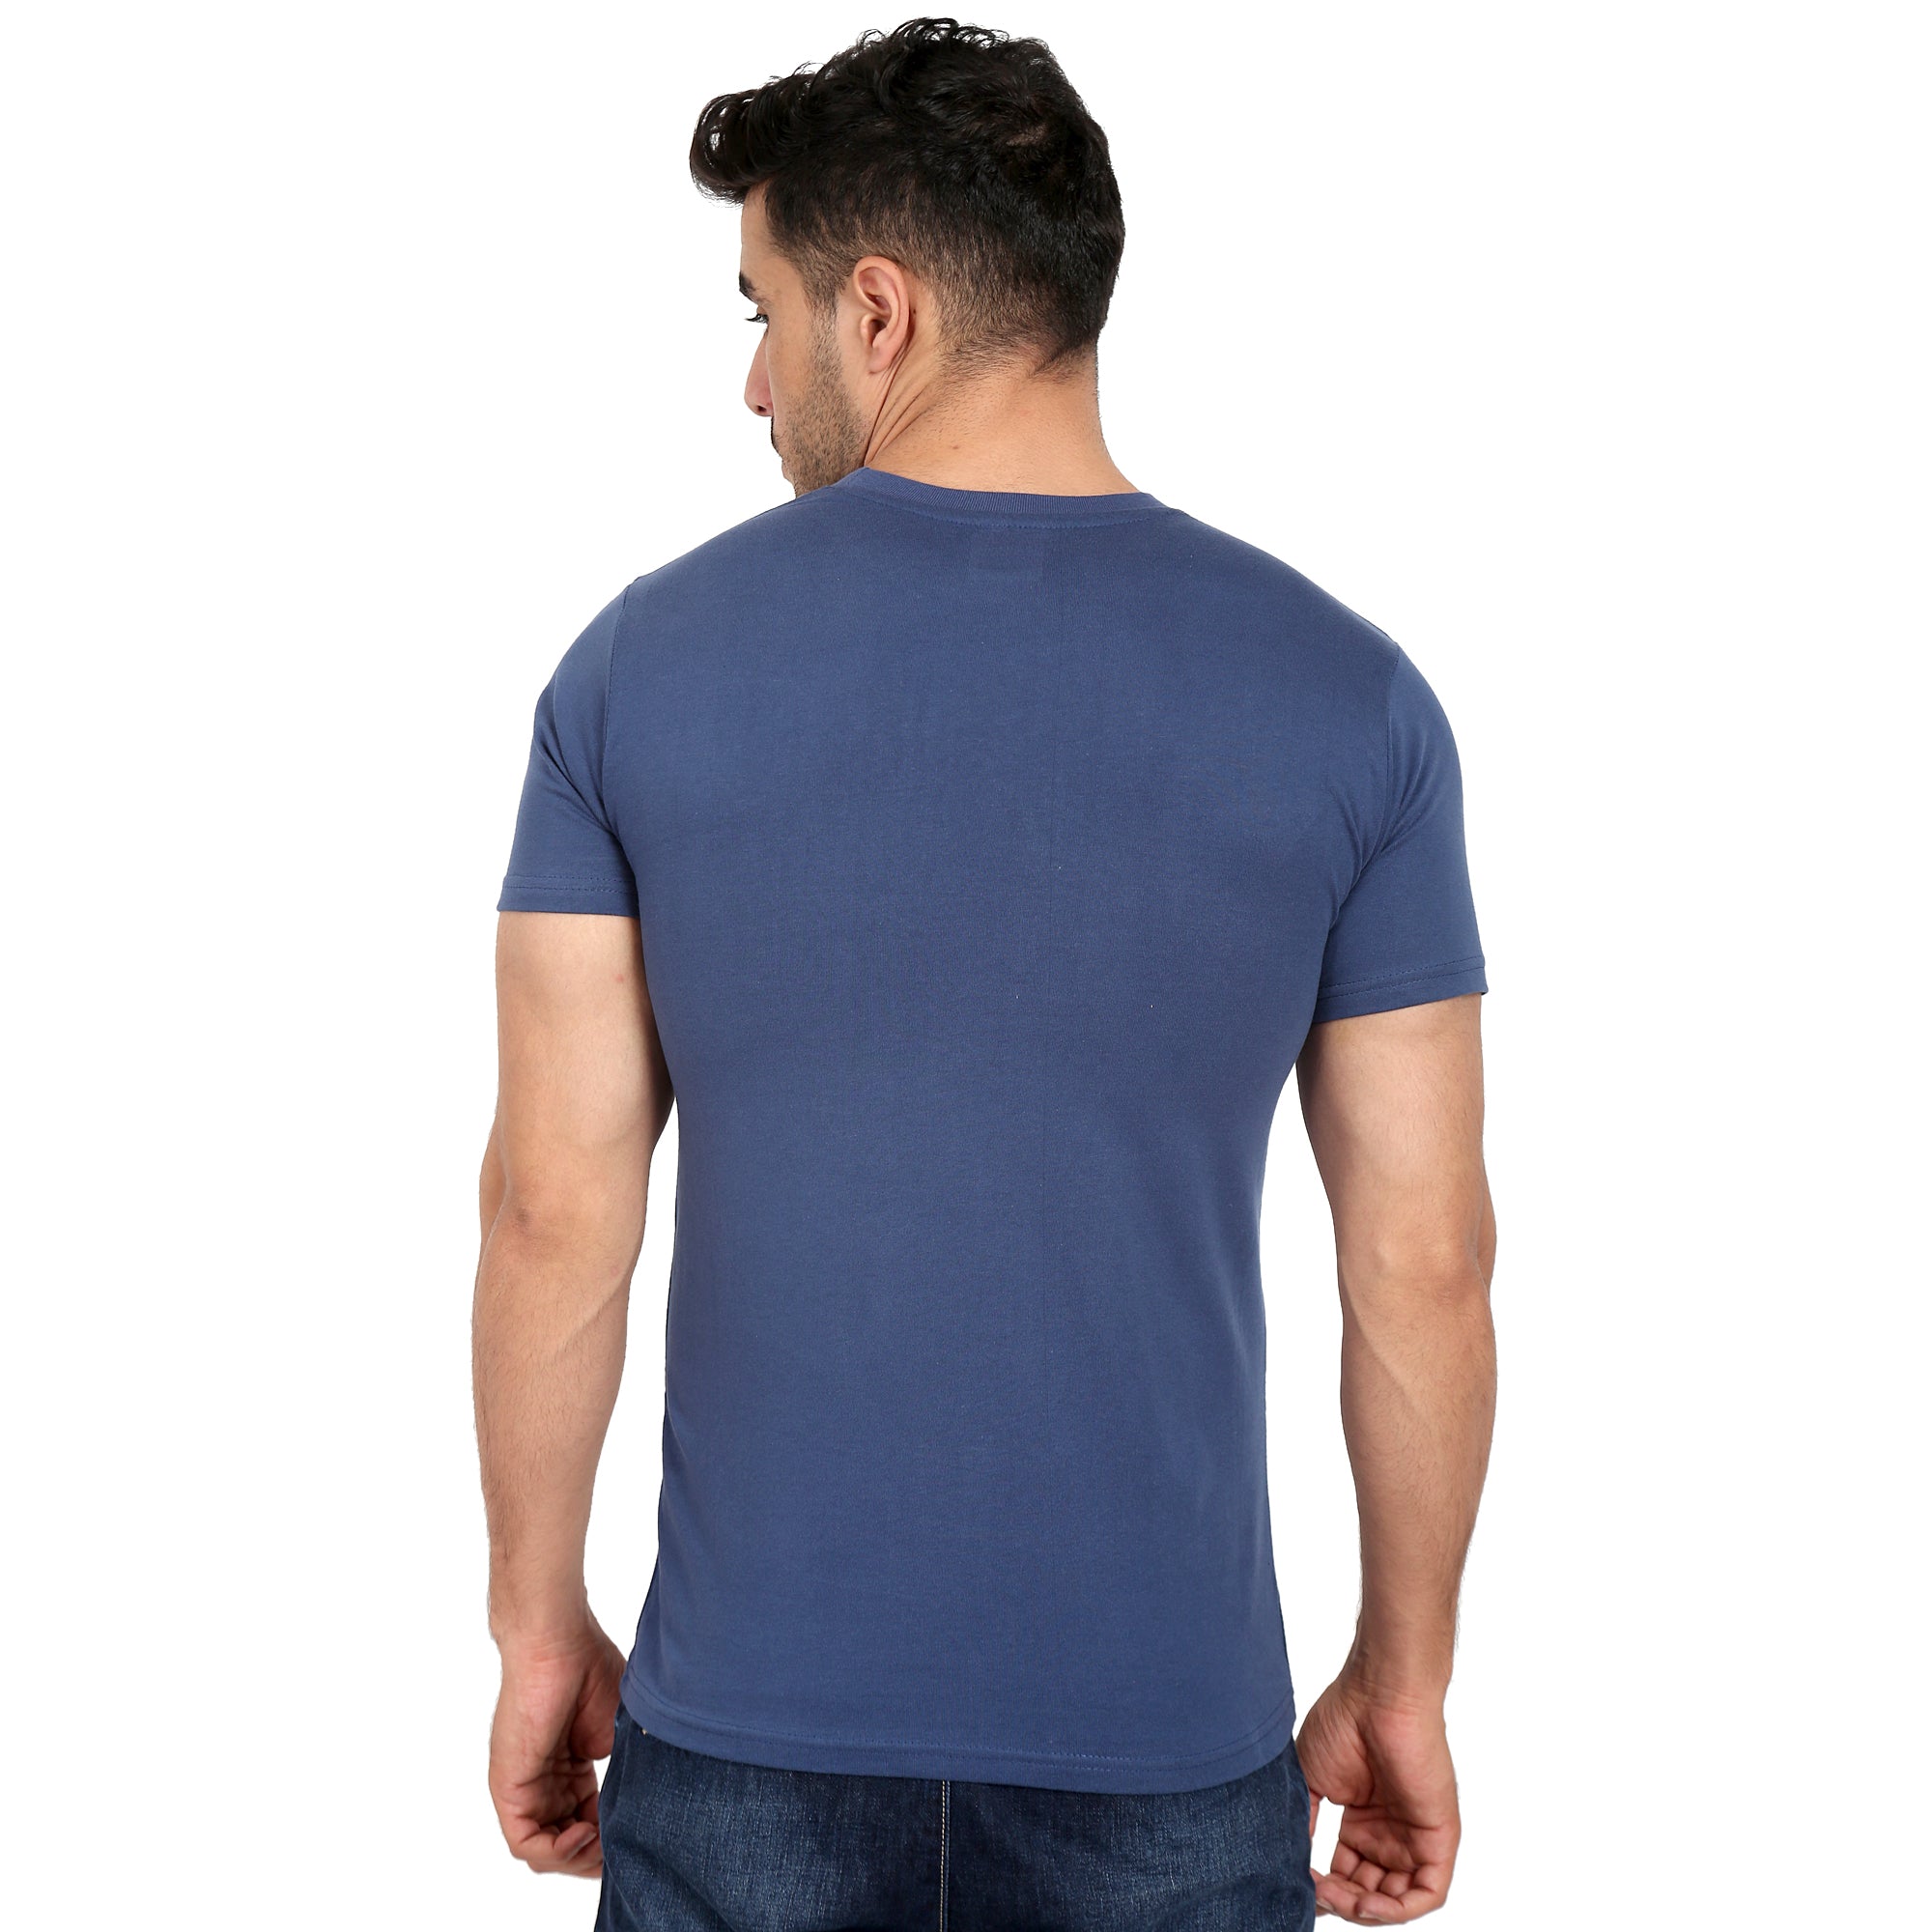 Combo Offer - Men Crew Neck Cotton T-Shirts - Half Sleeves - 3 Colors - Navy Blue, Blue & Grey